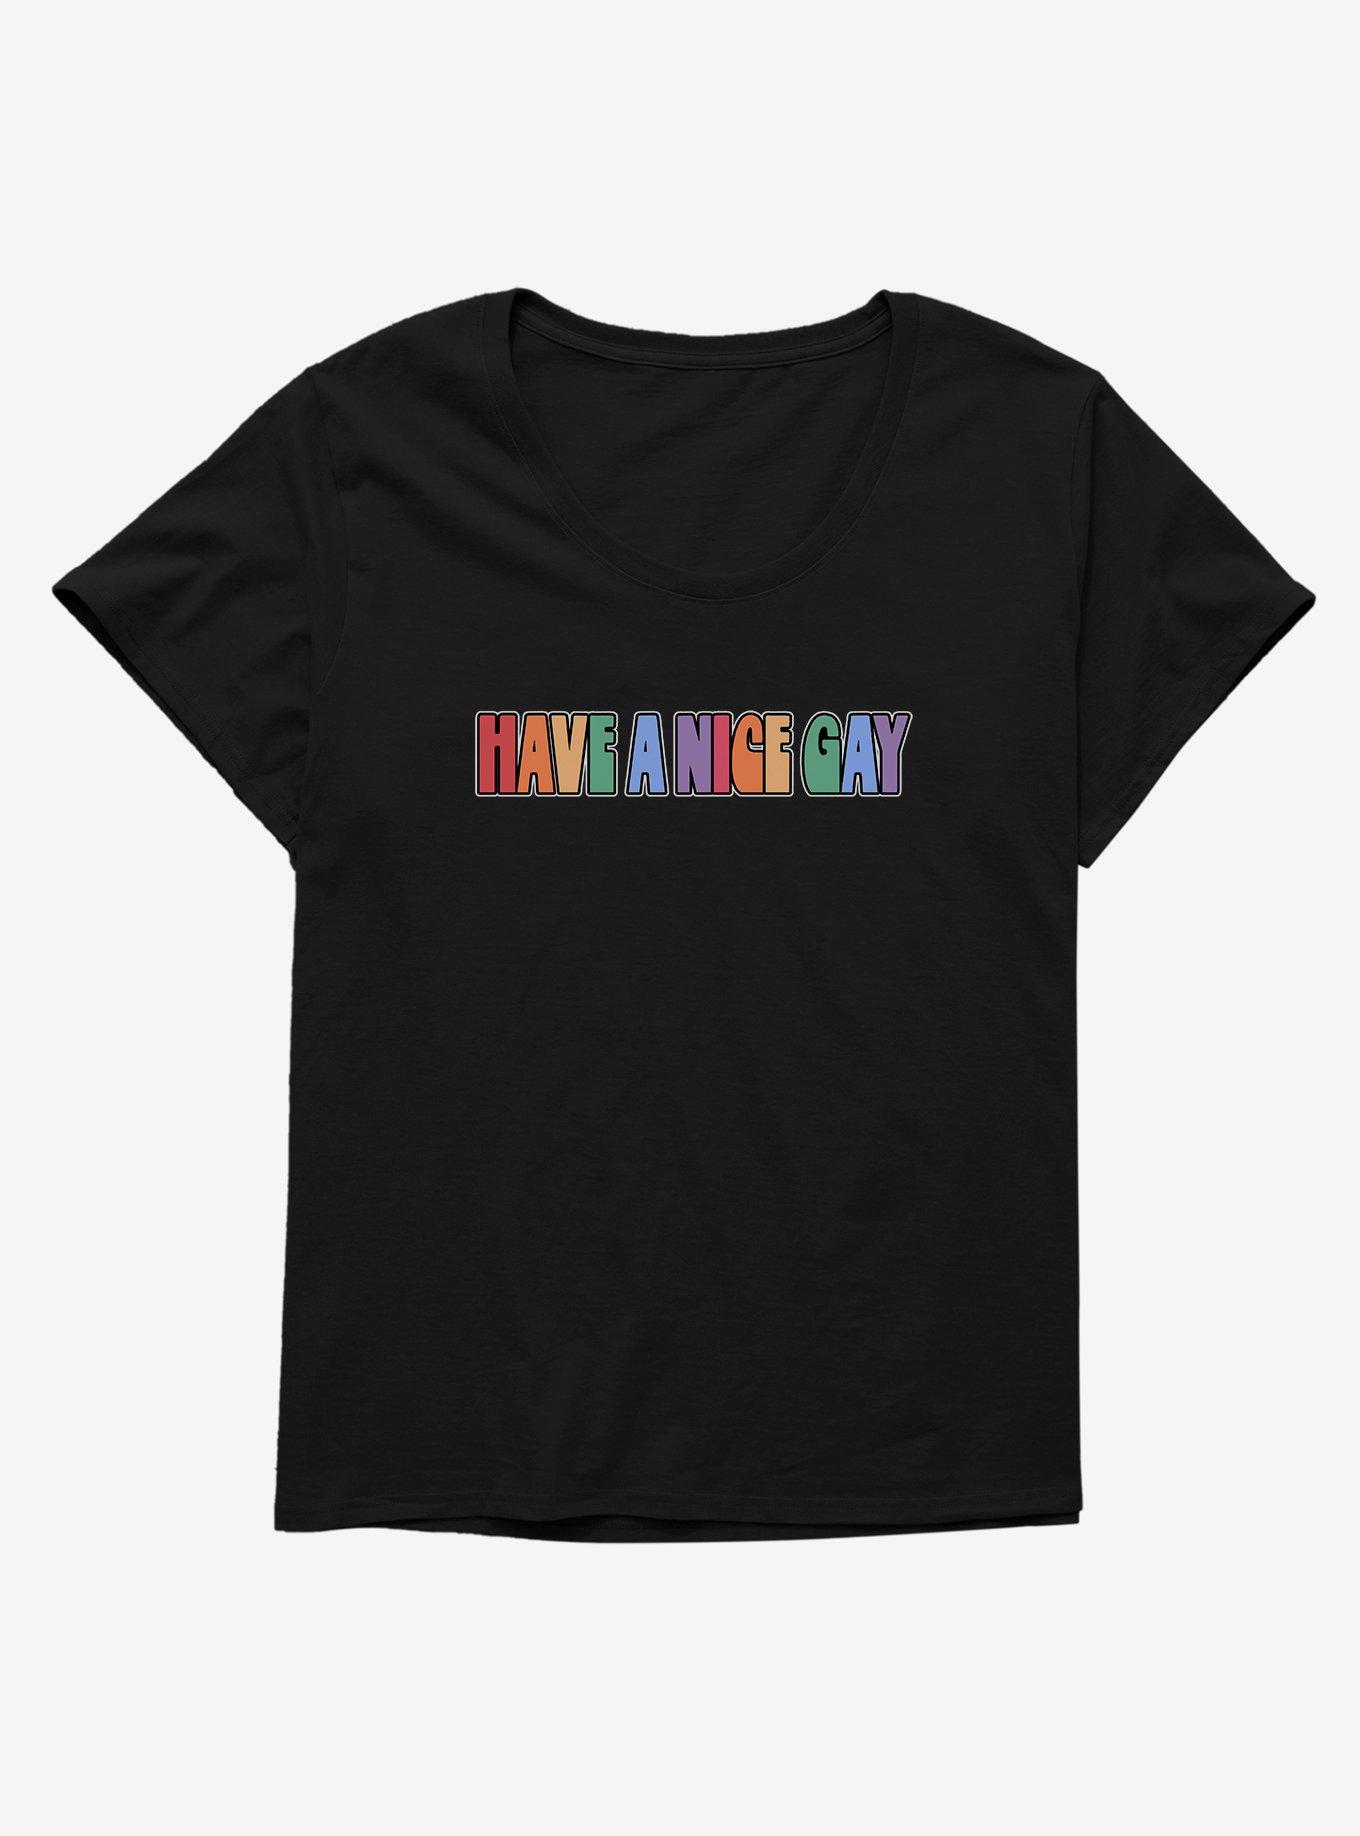 Have A Nice Gay T-Shirt Plus